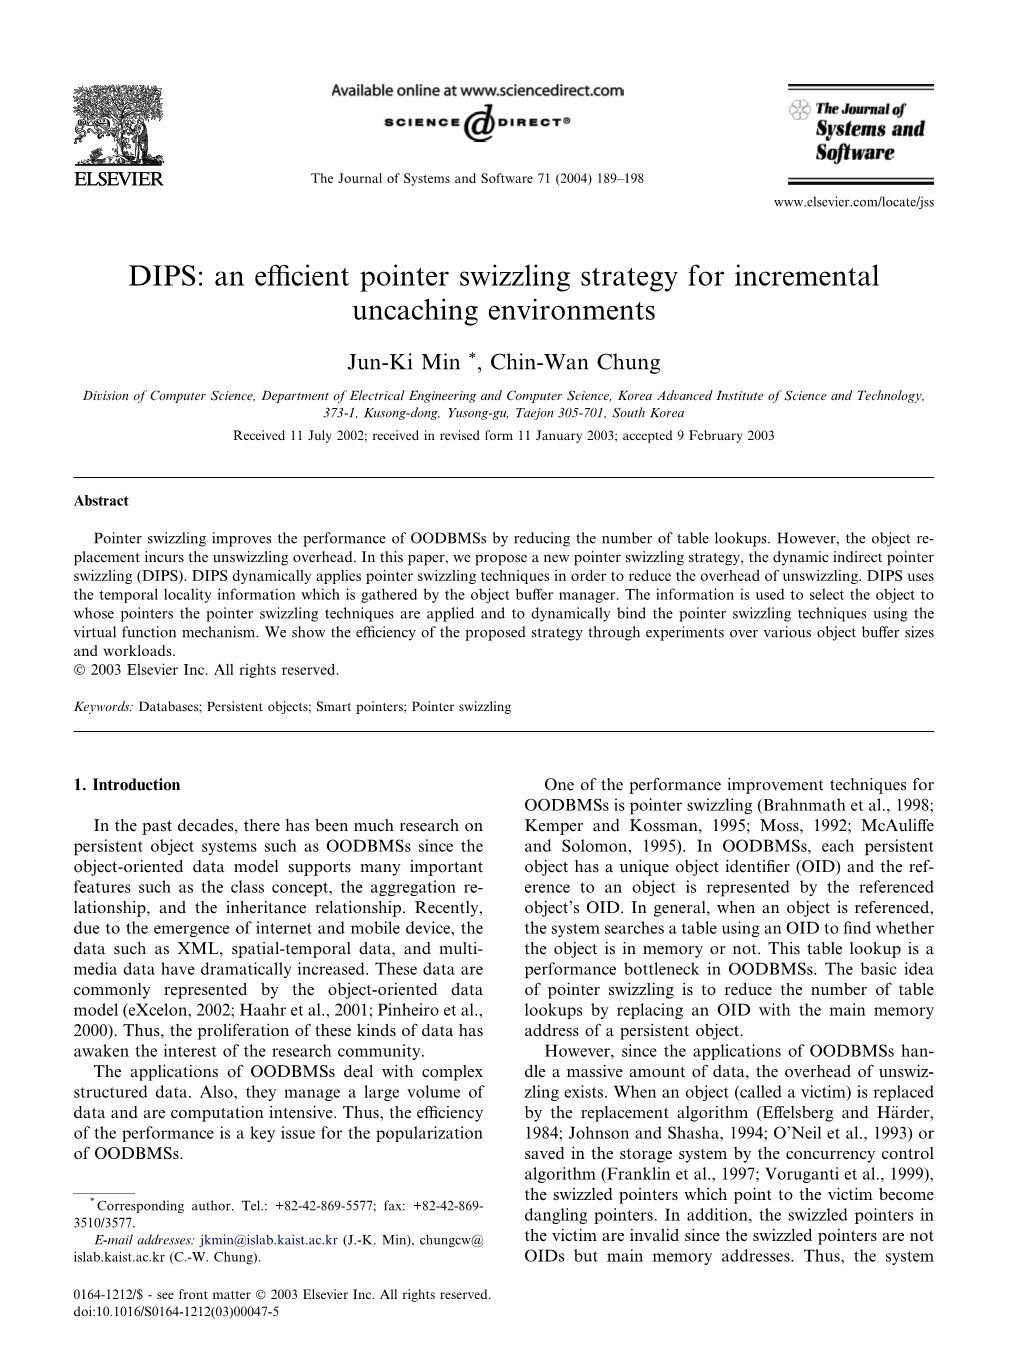 DIPS: an Efficient Pointer Swizzling Strategy for Incremental Uncaching